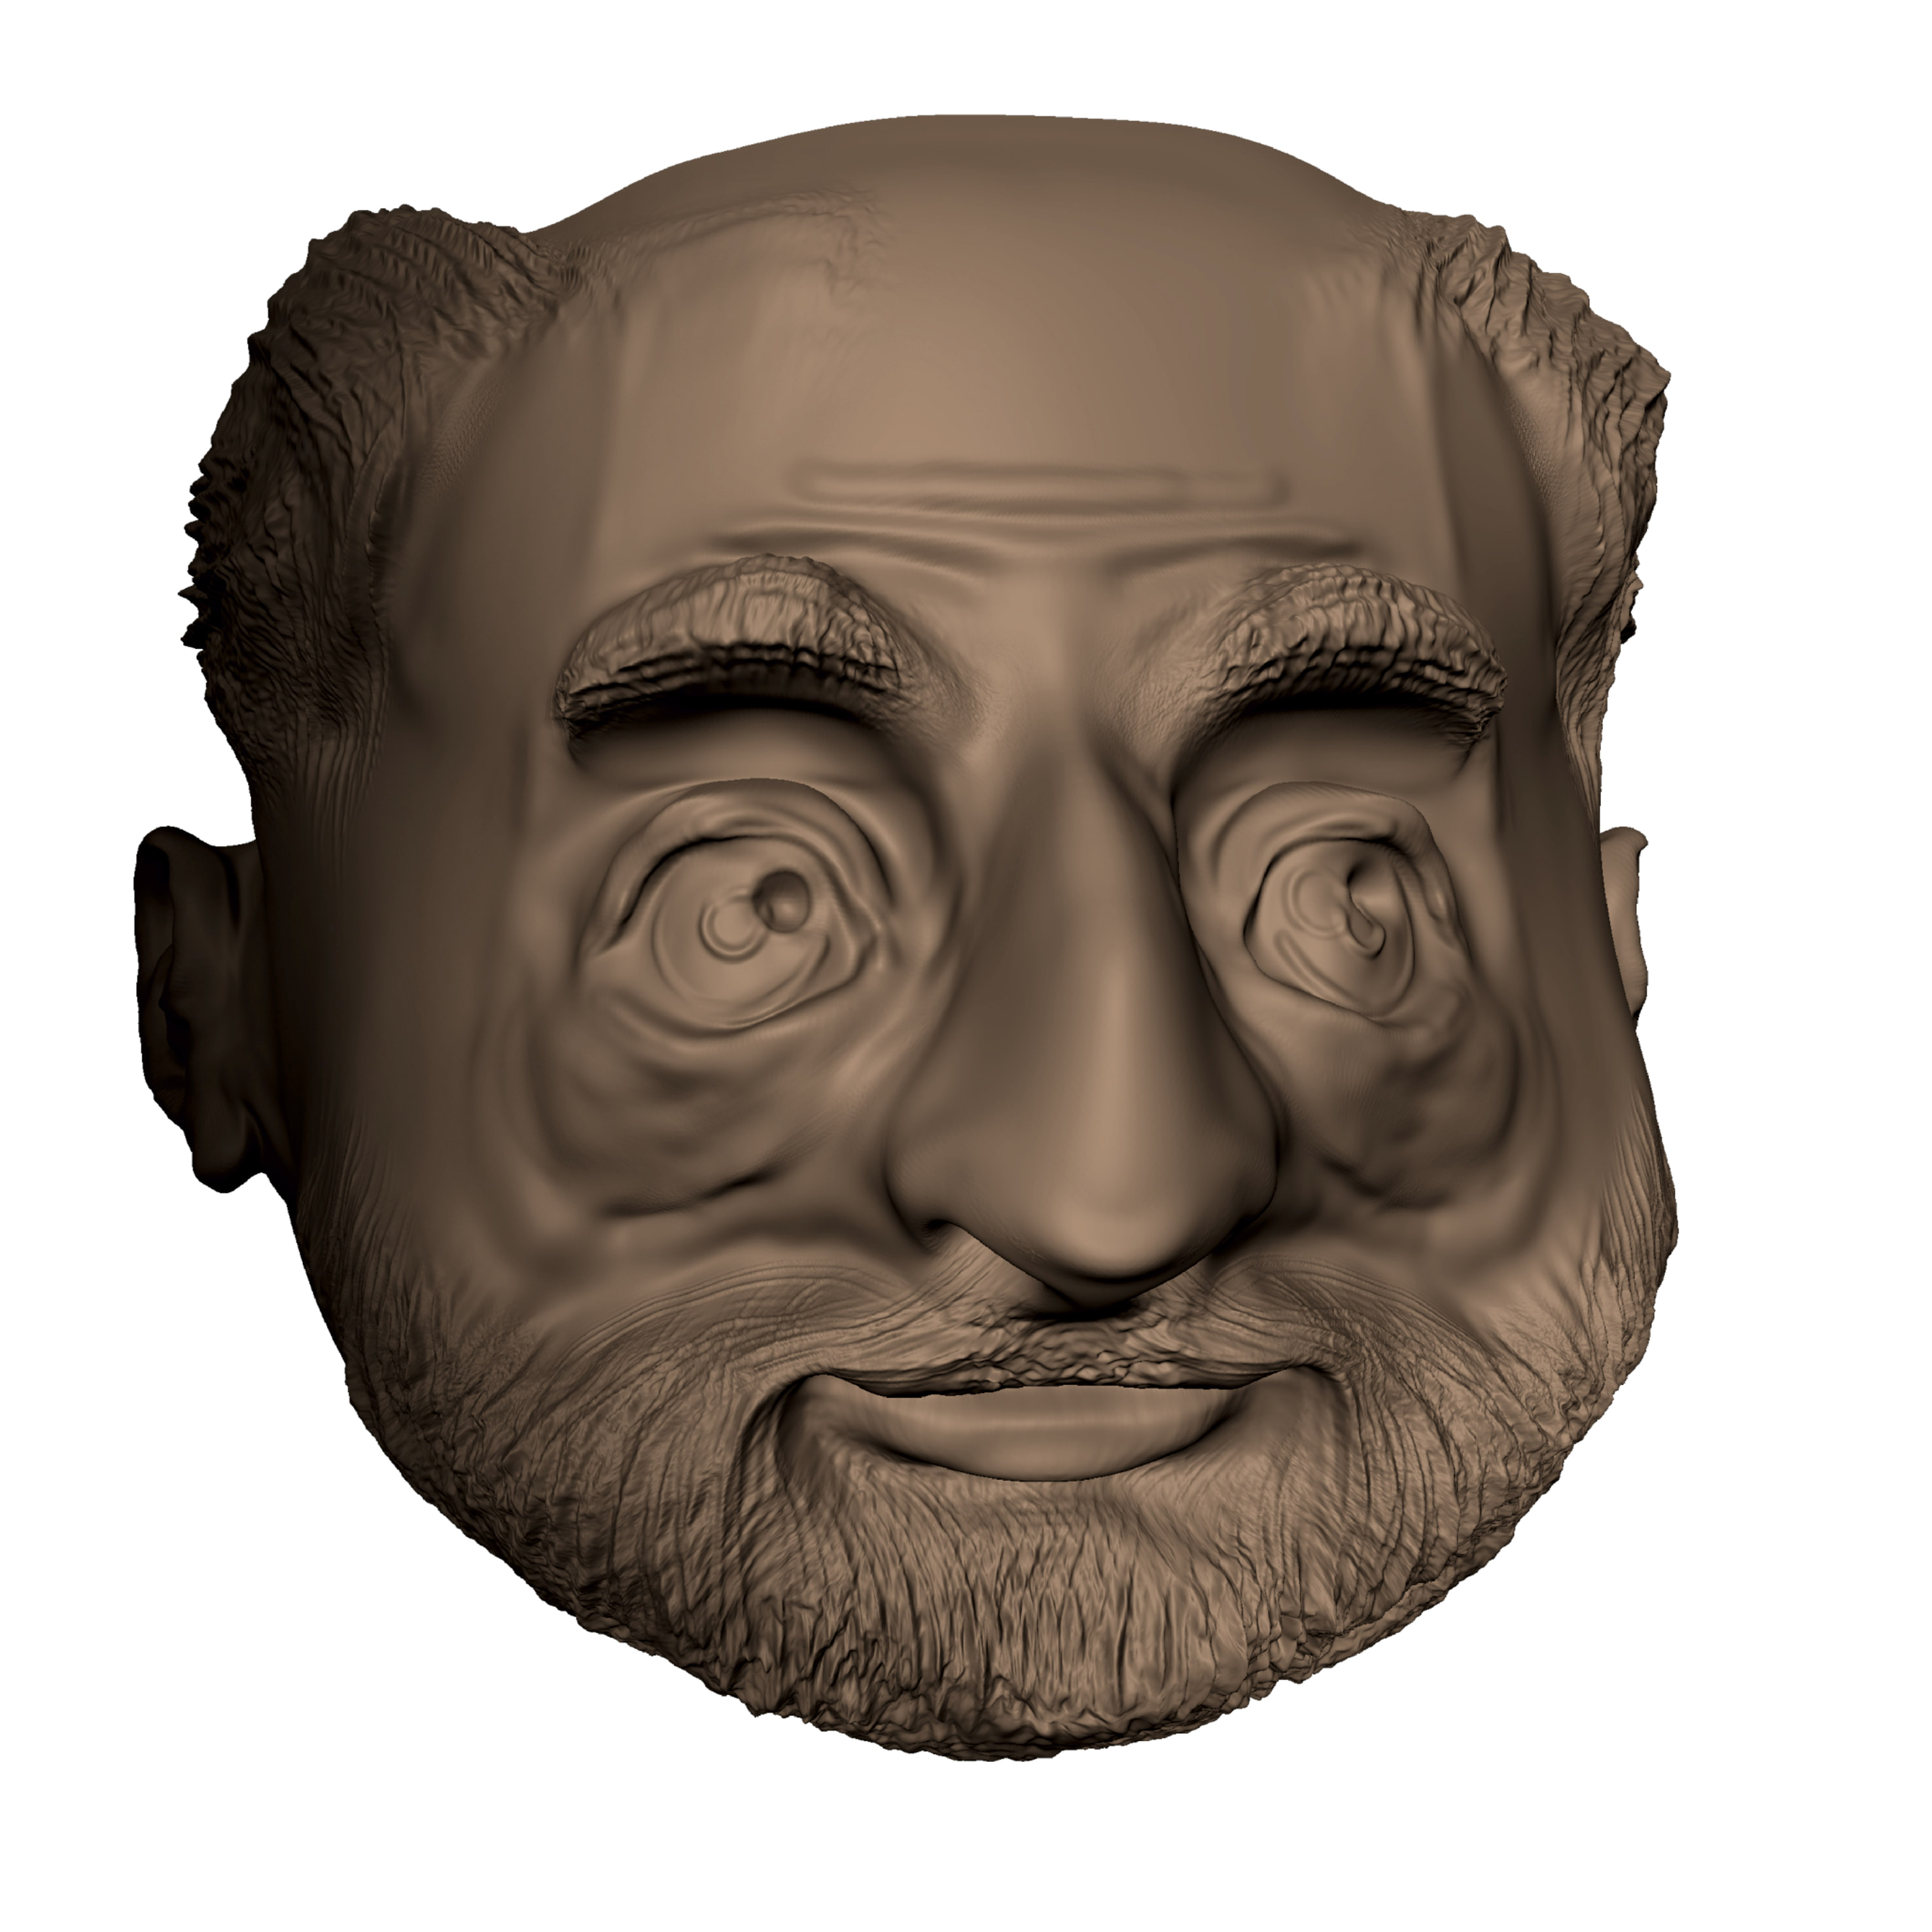 Abu Mohammad Mohammad
I've created this 3d sculpture using Autodesk Mudbox. The idea was to create a head of an old man. In my opinion, I achieved my goal. This experience is my first and it was an opportunity to create something new by using some new tools. I would like to learn more about sculpting and to become better in this area.